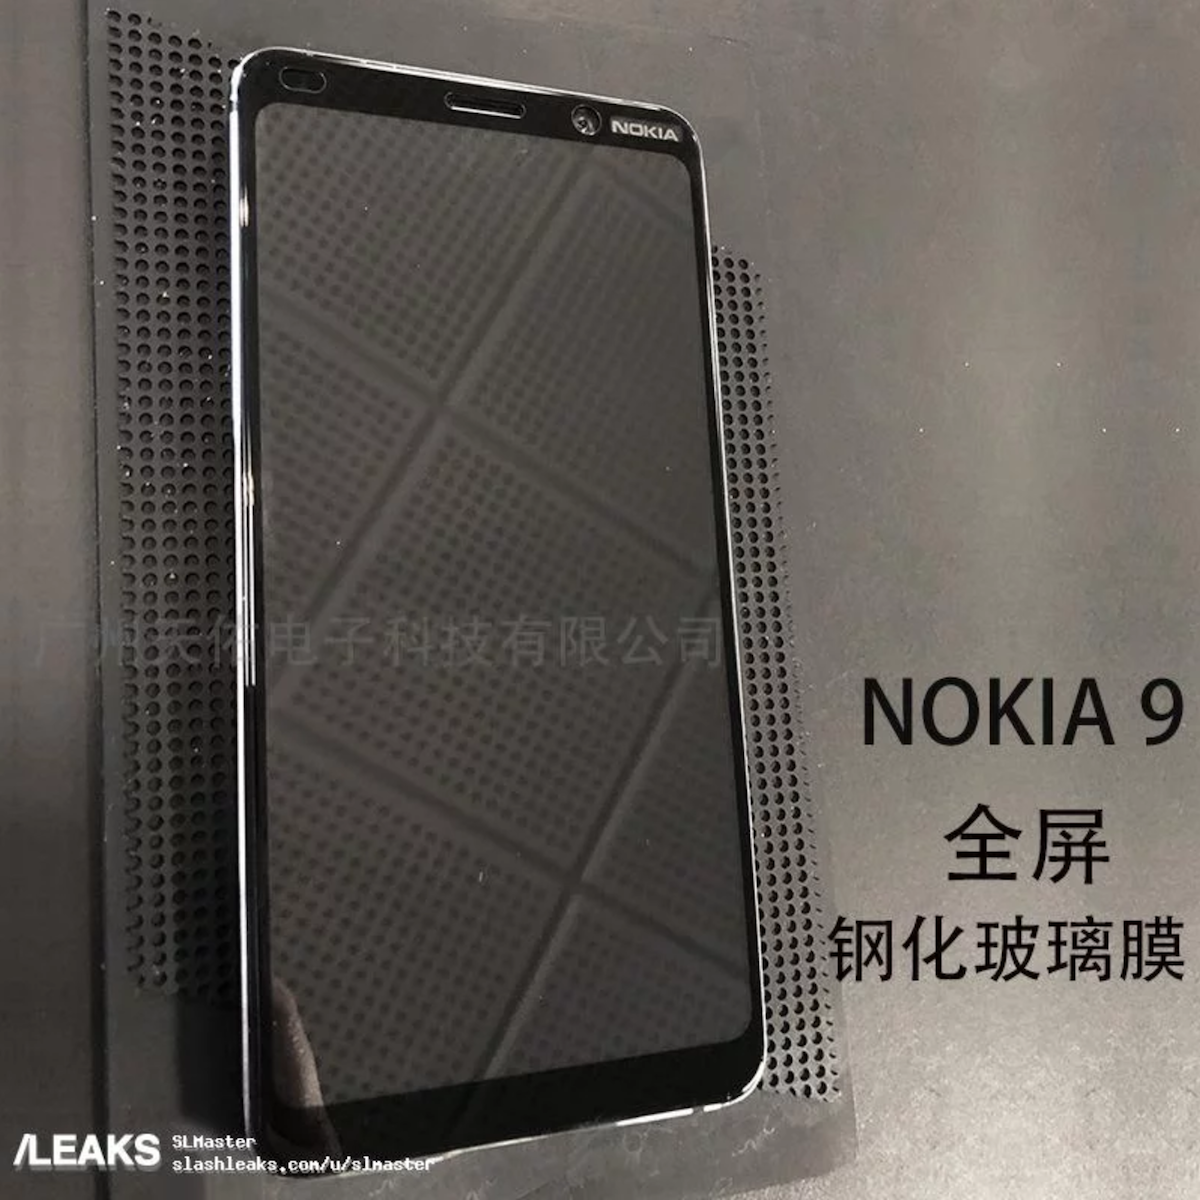 What about the Nokia 9